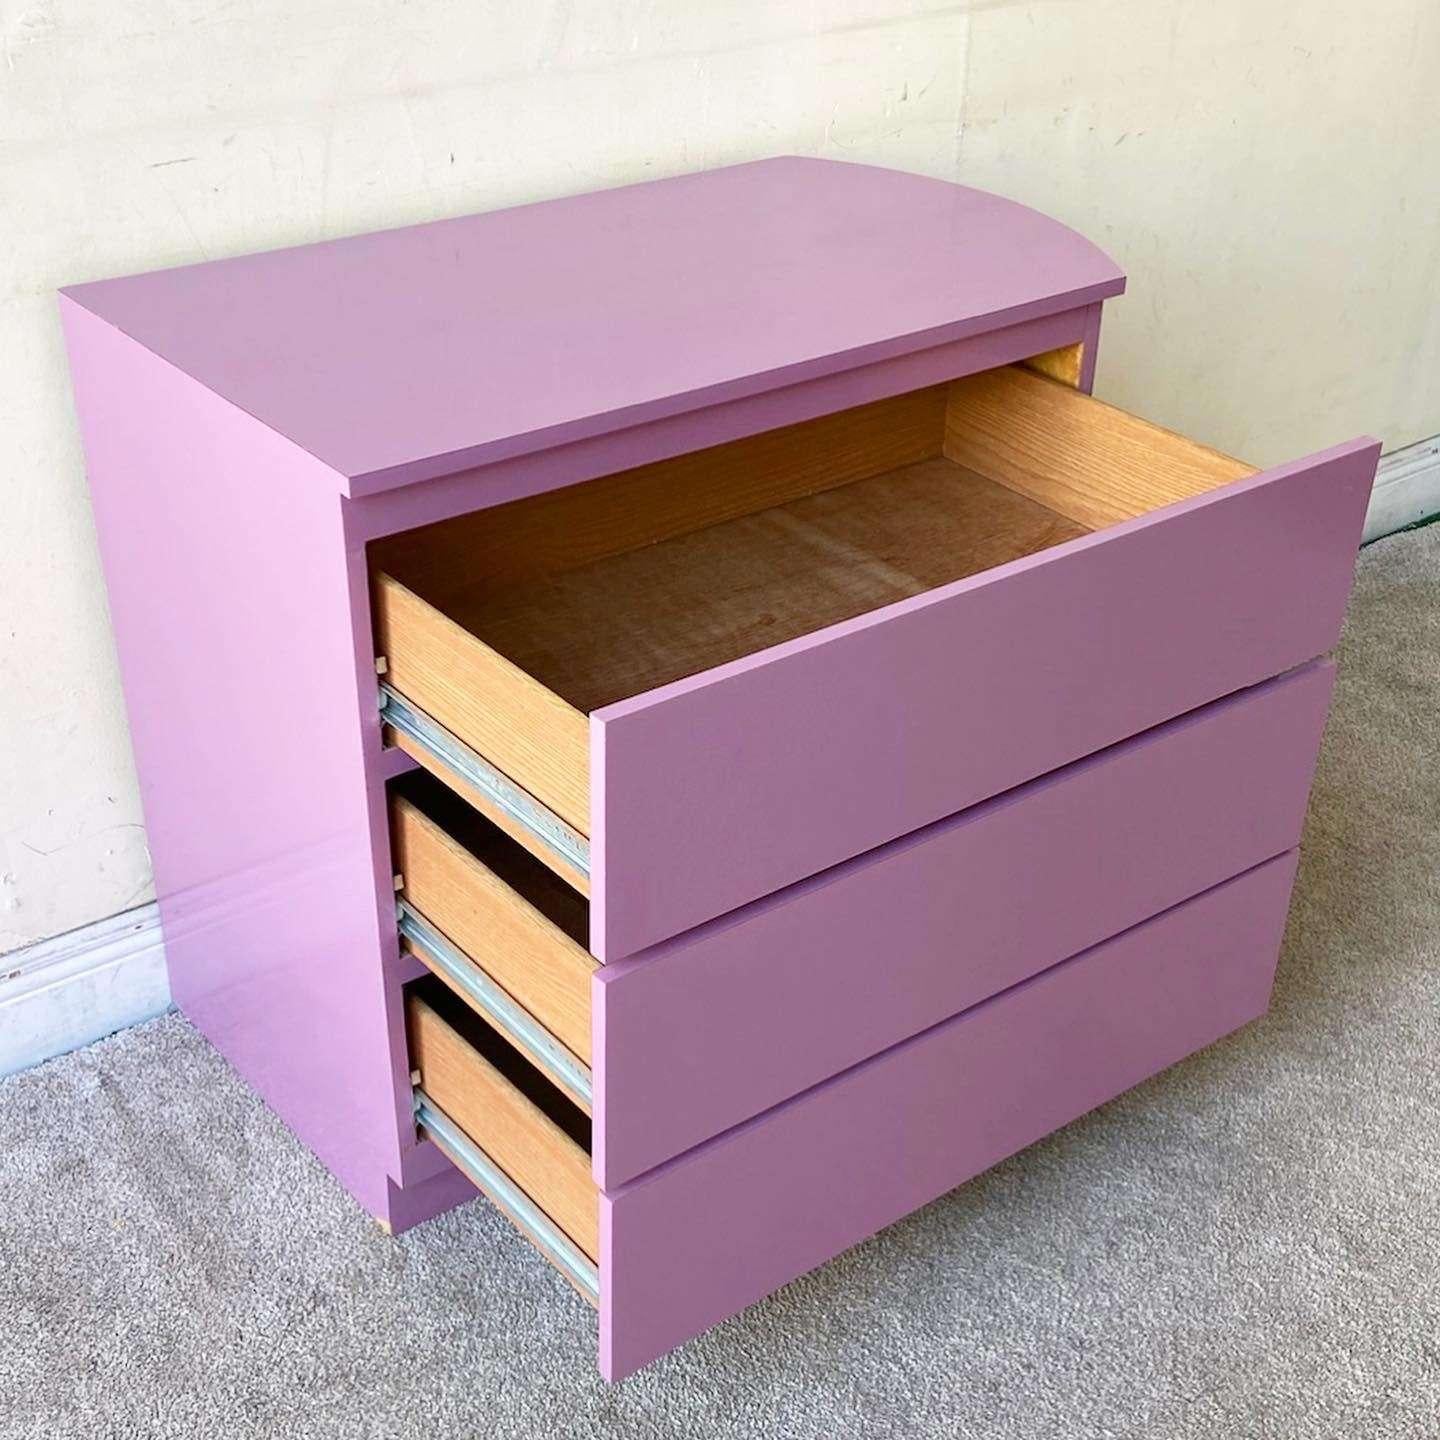 Incredible vintage Postmodern chest of drawers. Features a purple lacquer laminate with three large spacious drawers.